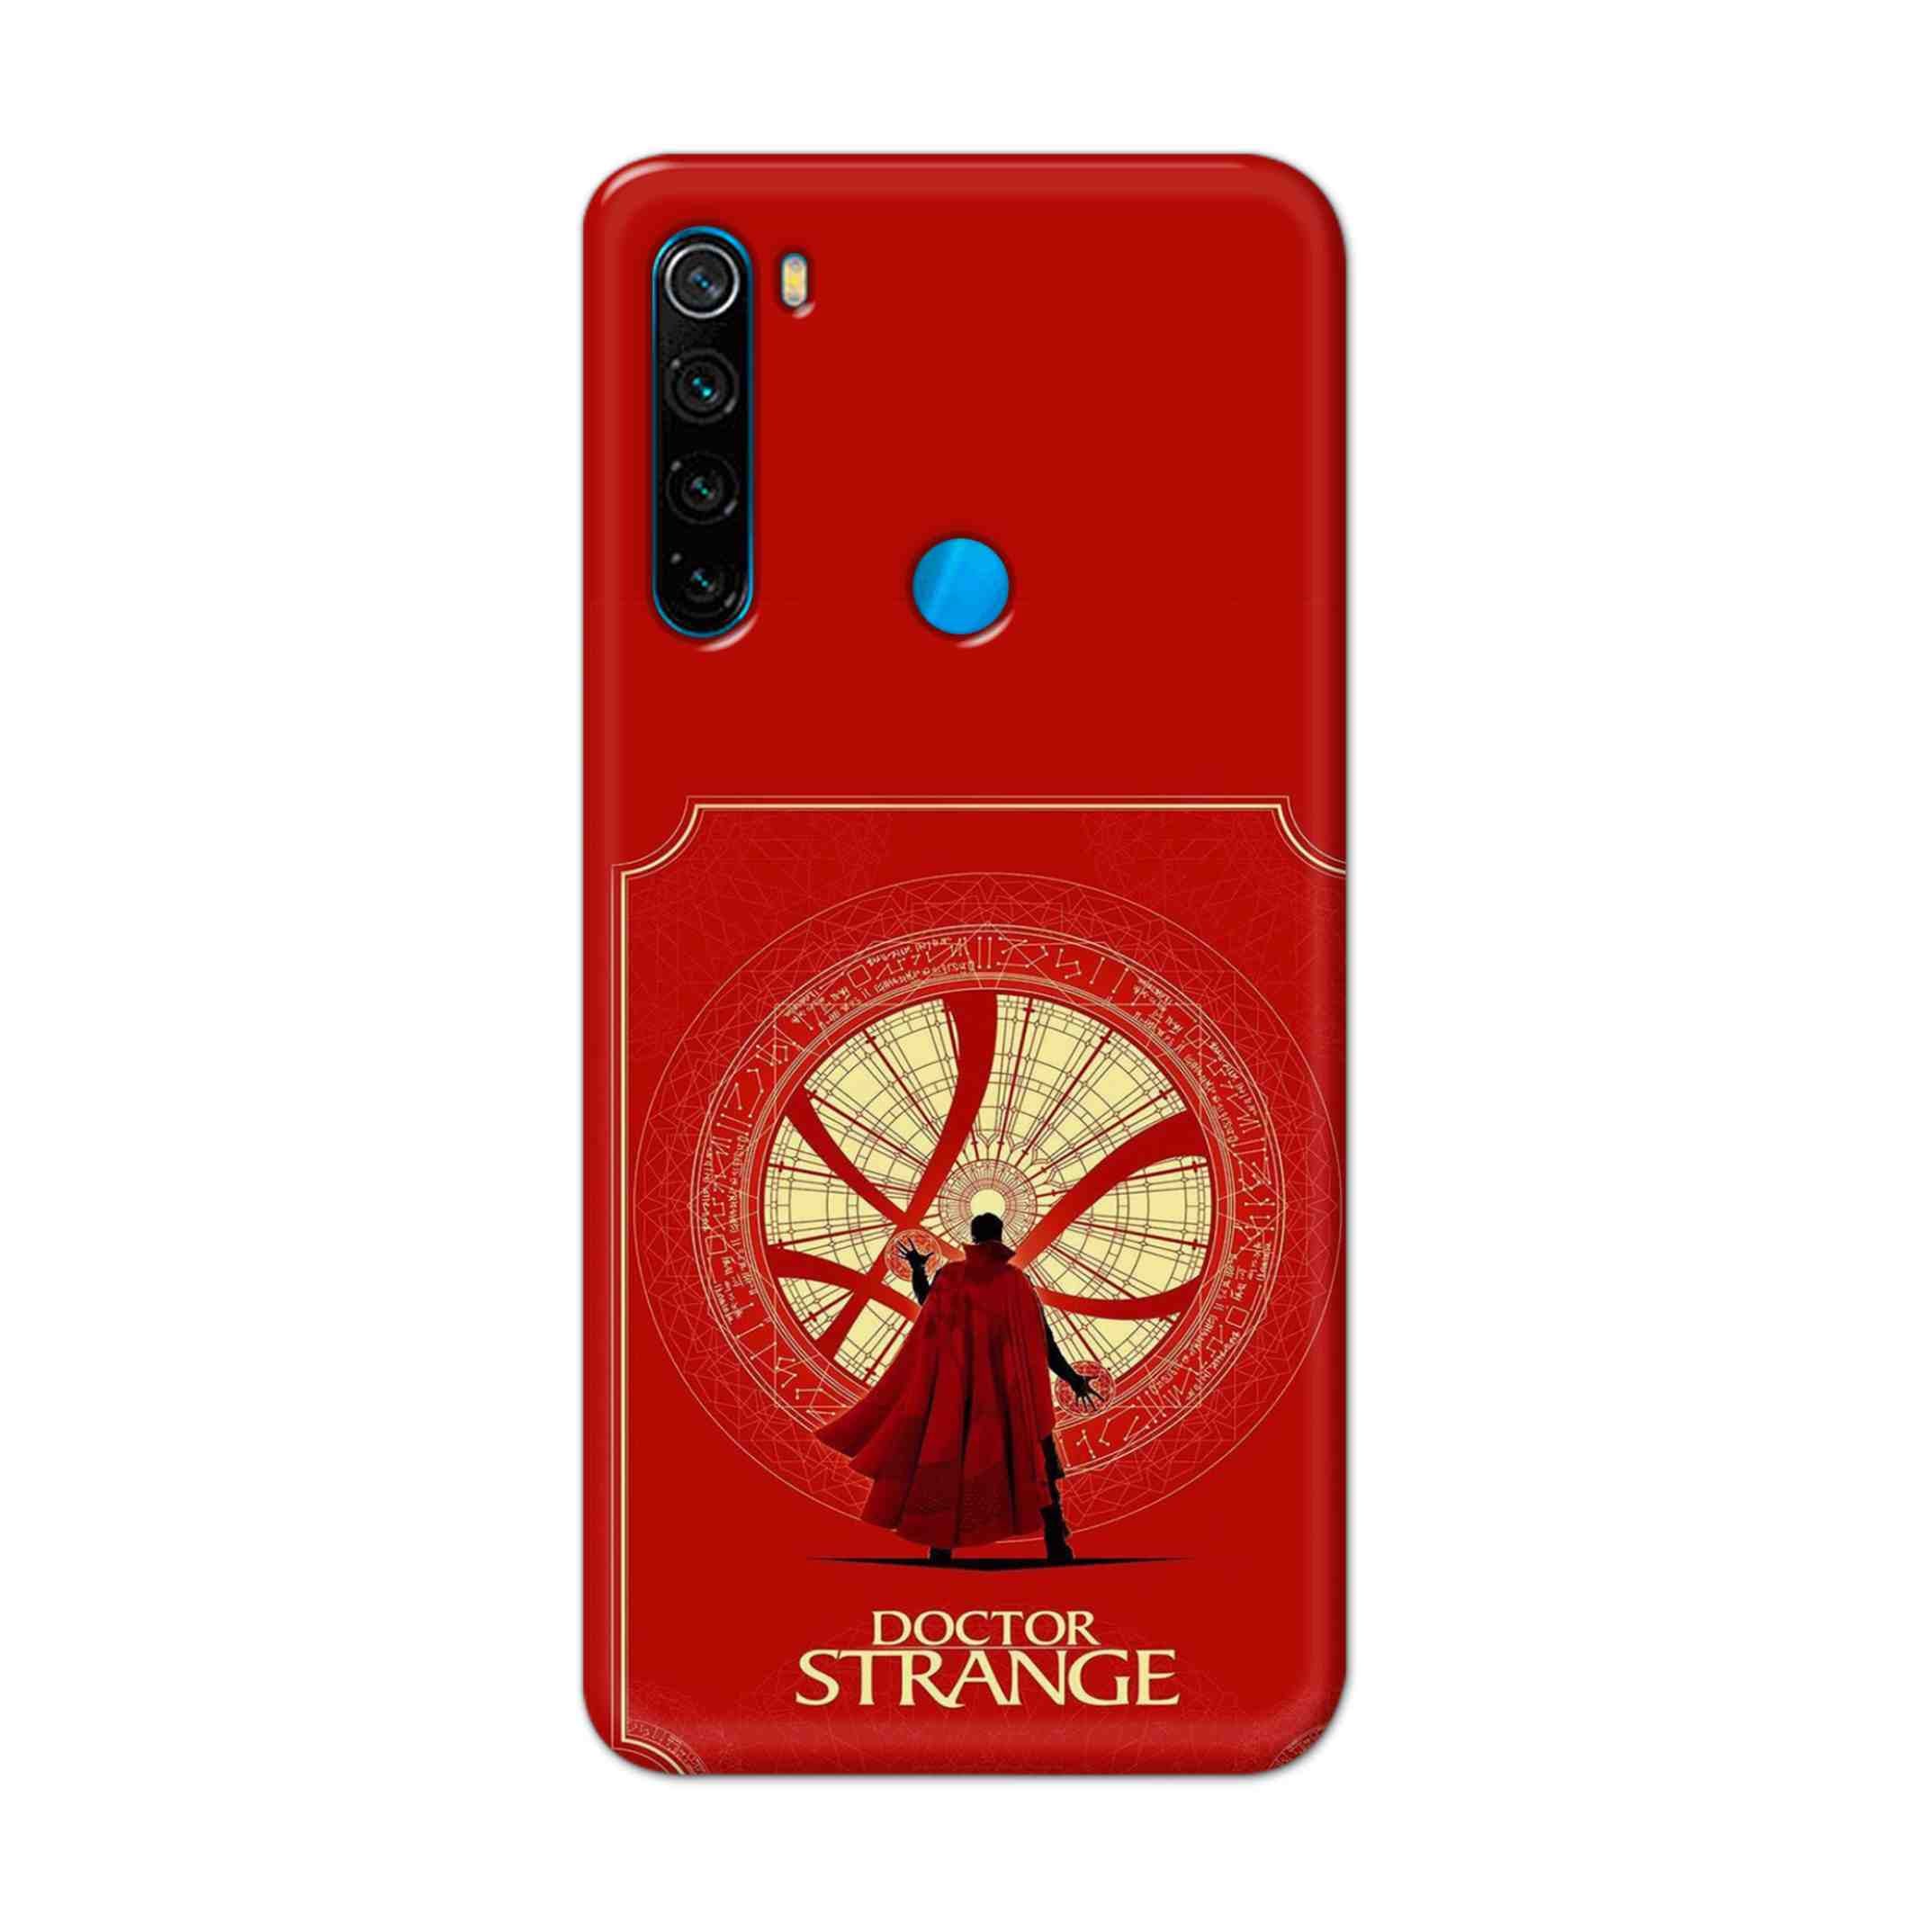 Buy Blood Doctor Strange Hard Back Mobile Phone Case Cover For Xiaomi Redmi Note 8 Online